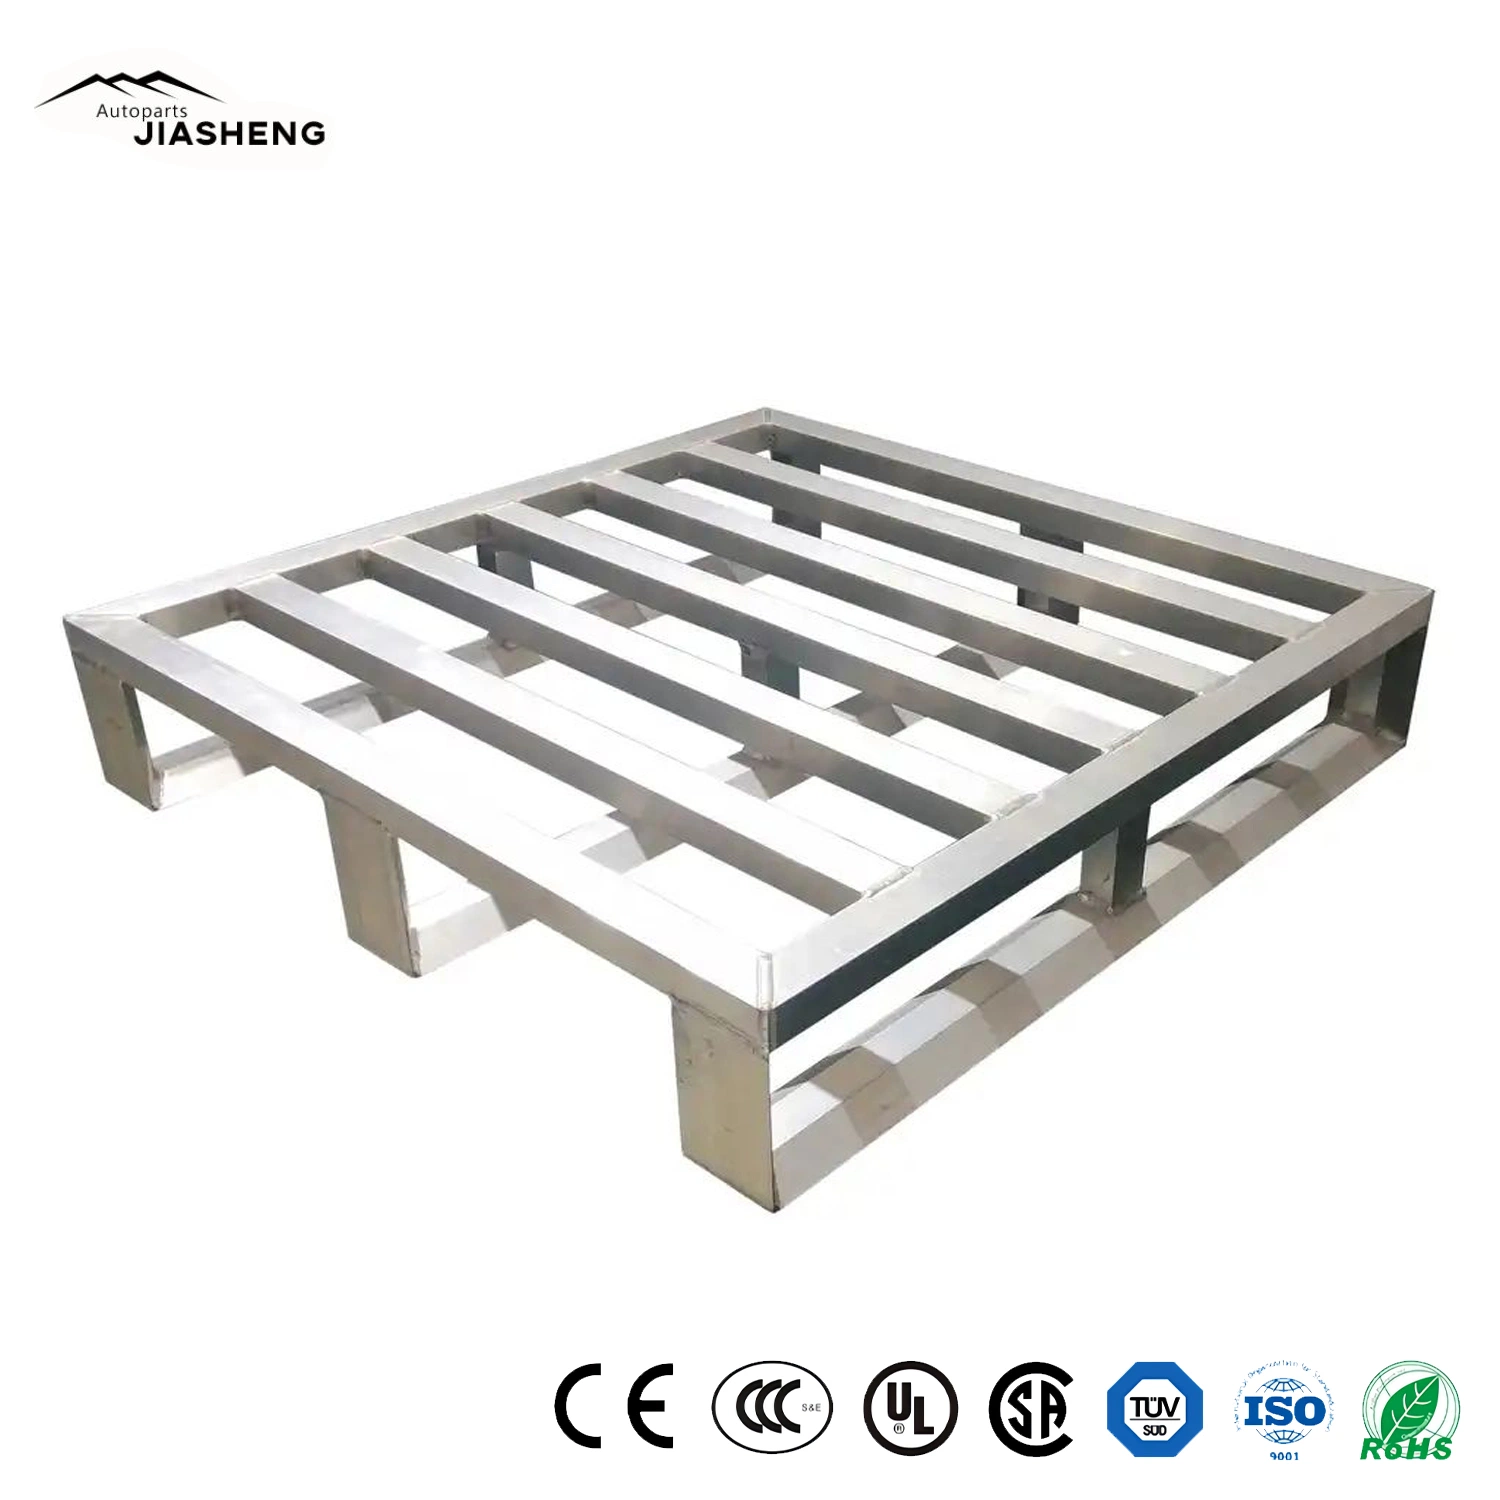 Directly Factory Price Customized Steel Pallet Metal Pallet Stacking Pallet Sale Well